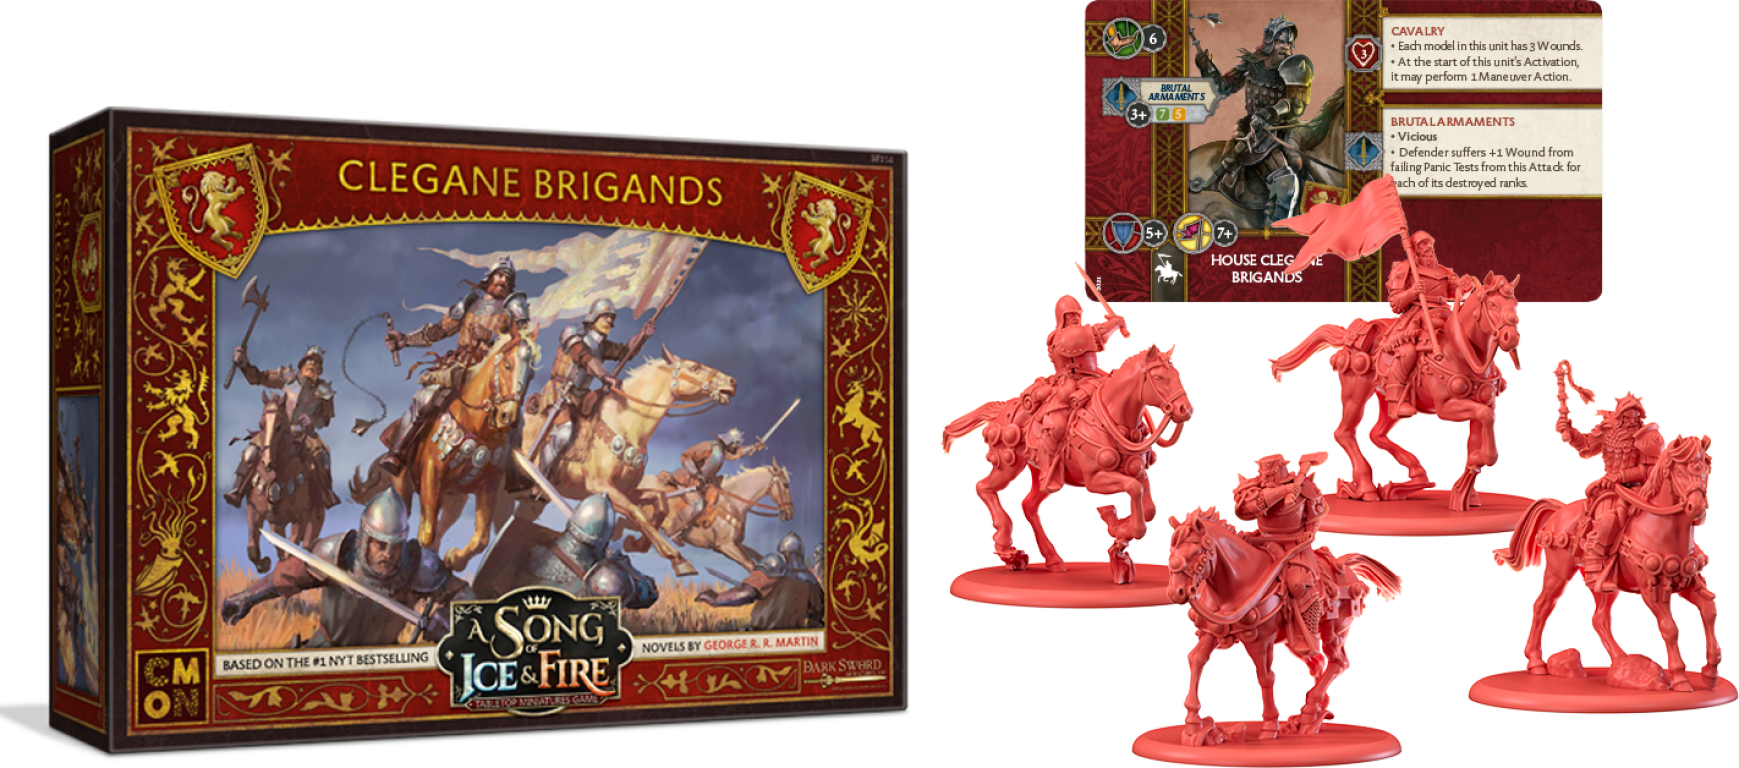 A Song of Ice & Fire: Tabletop Miniatures Game – Clegane Brigands partes